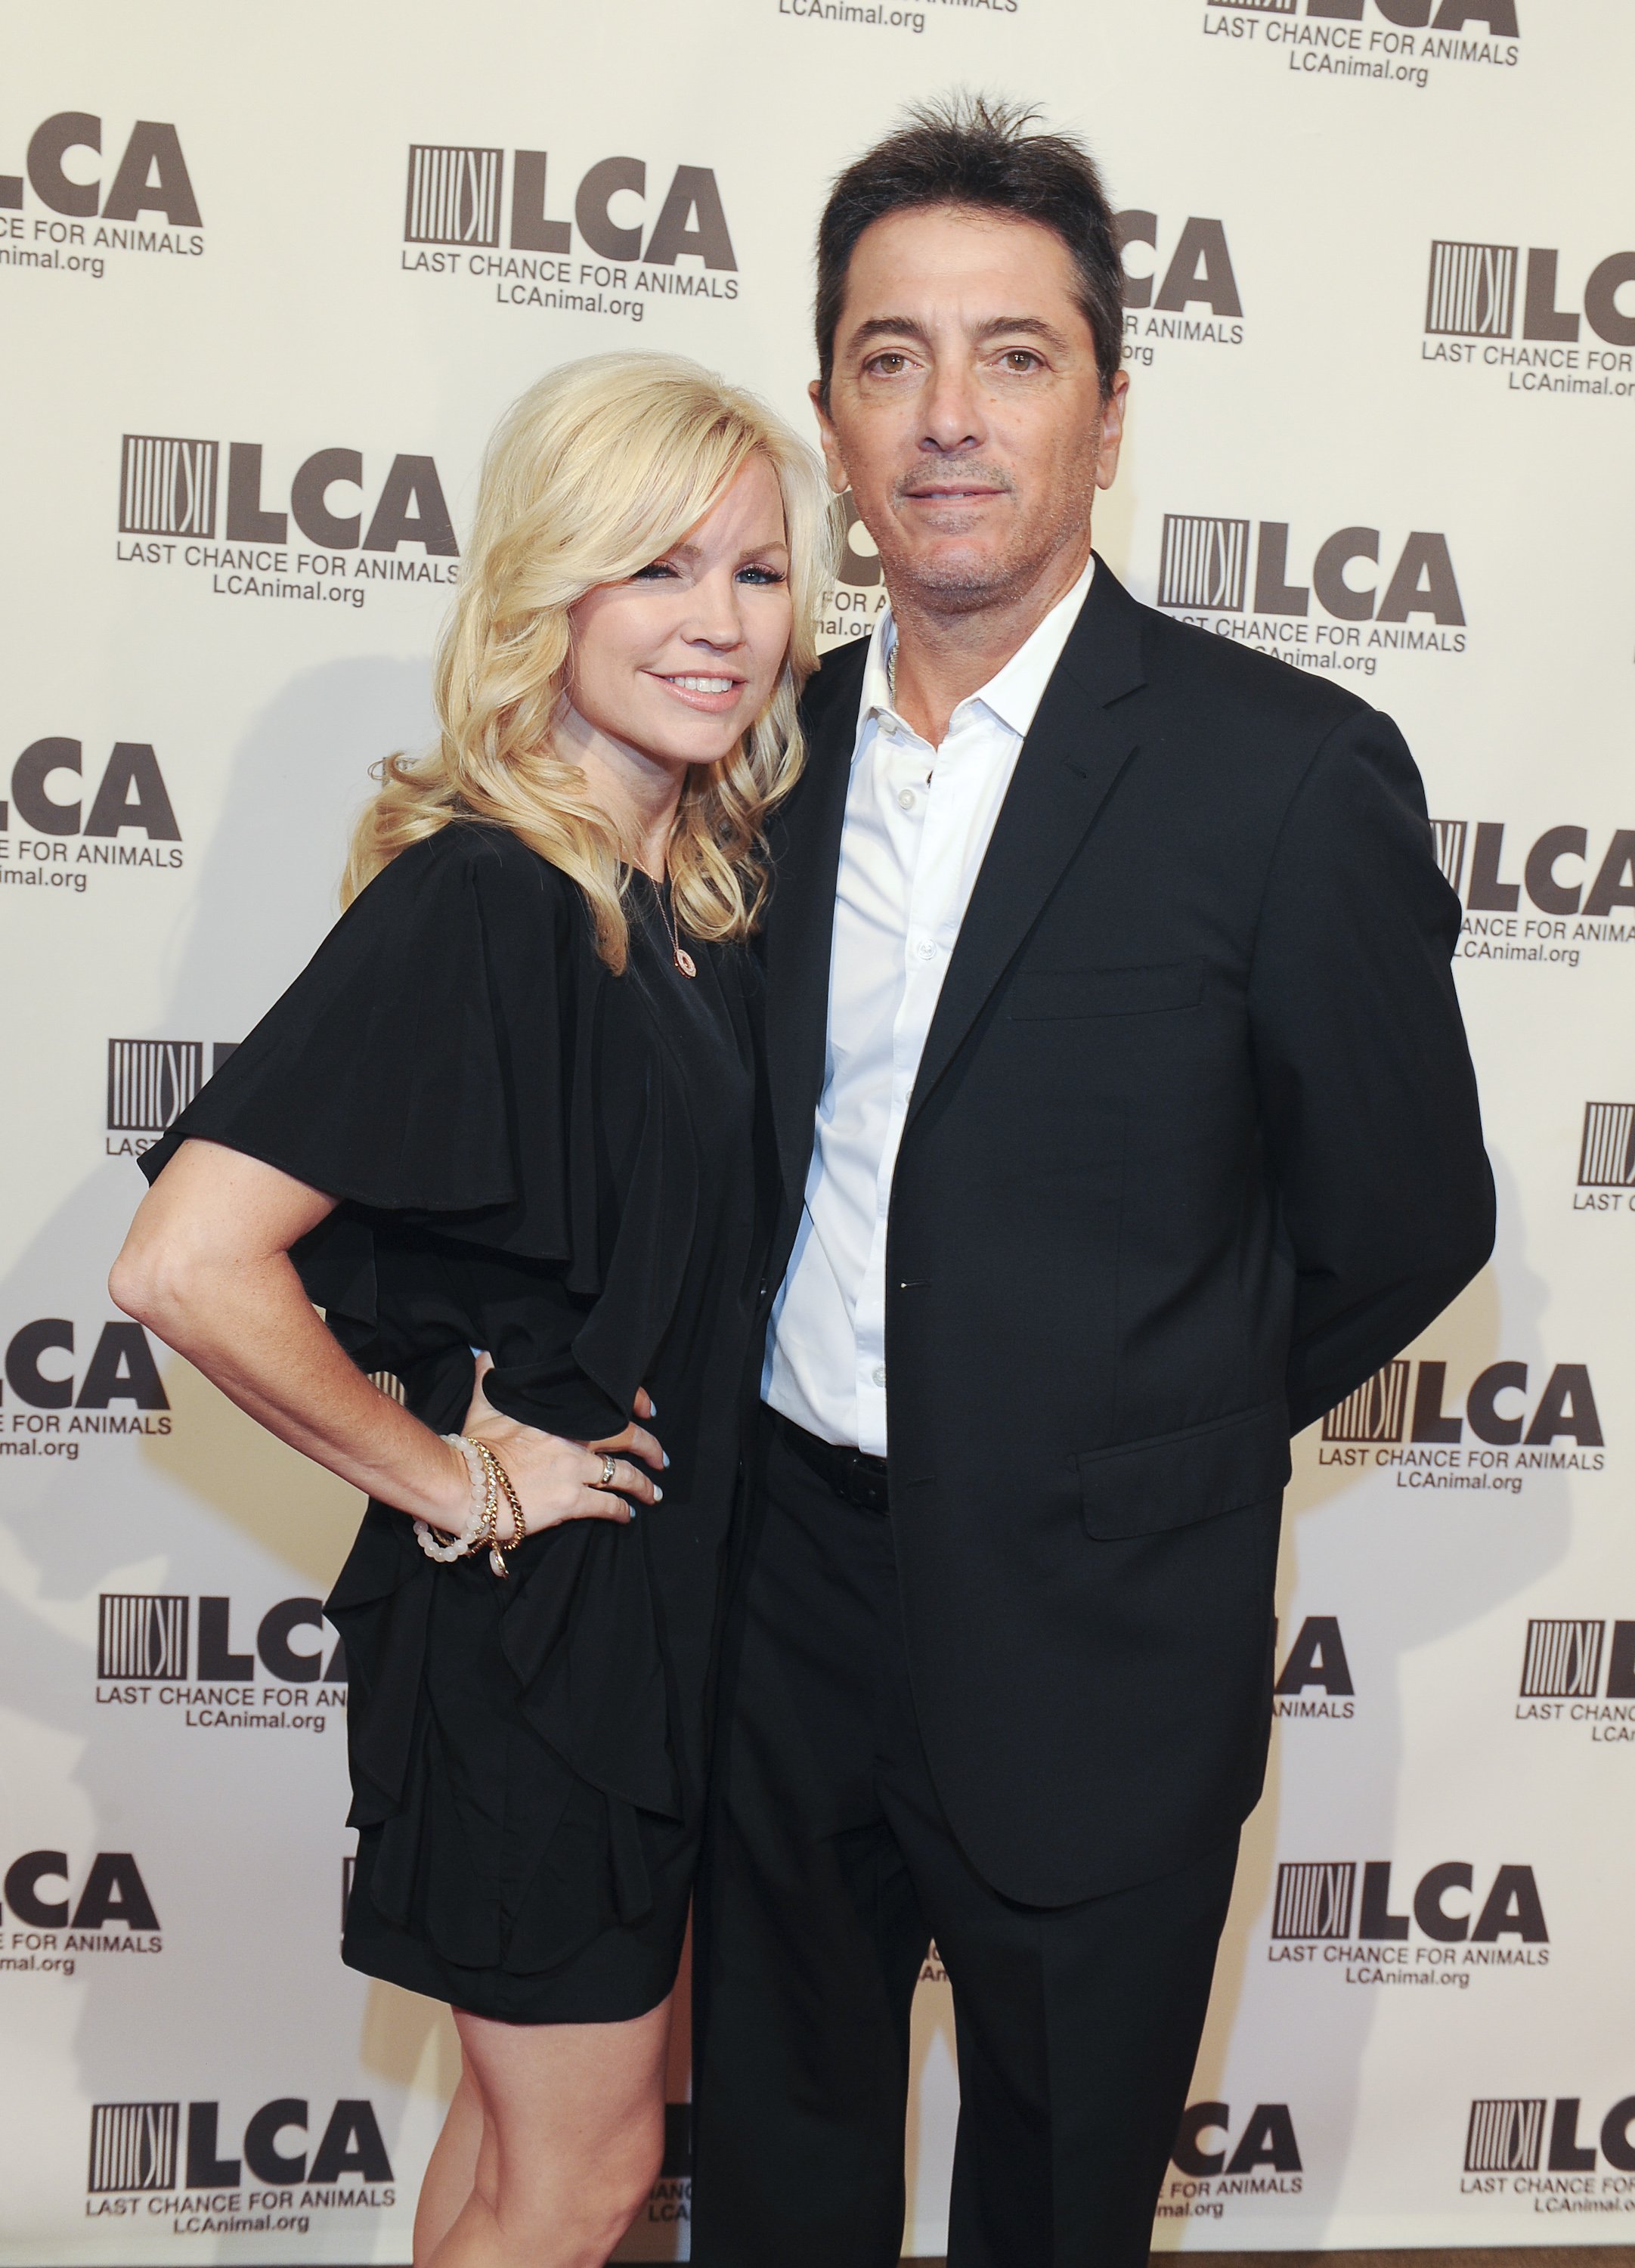 Renee Sloan and Scott Baio during the Last Chance For Animals 33rd Annual Celebrity Benefit Gala at The Beverly Hilton Hotel on October 14, 2017 in Beverly Hills, California. / Source: Getty Images